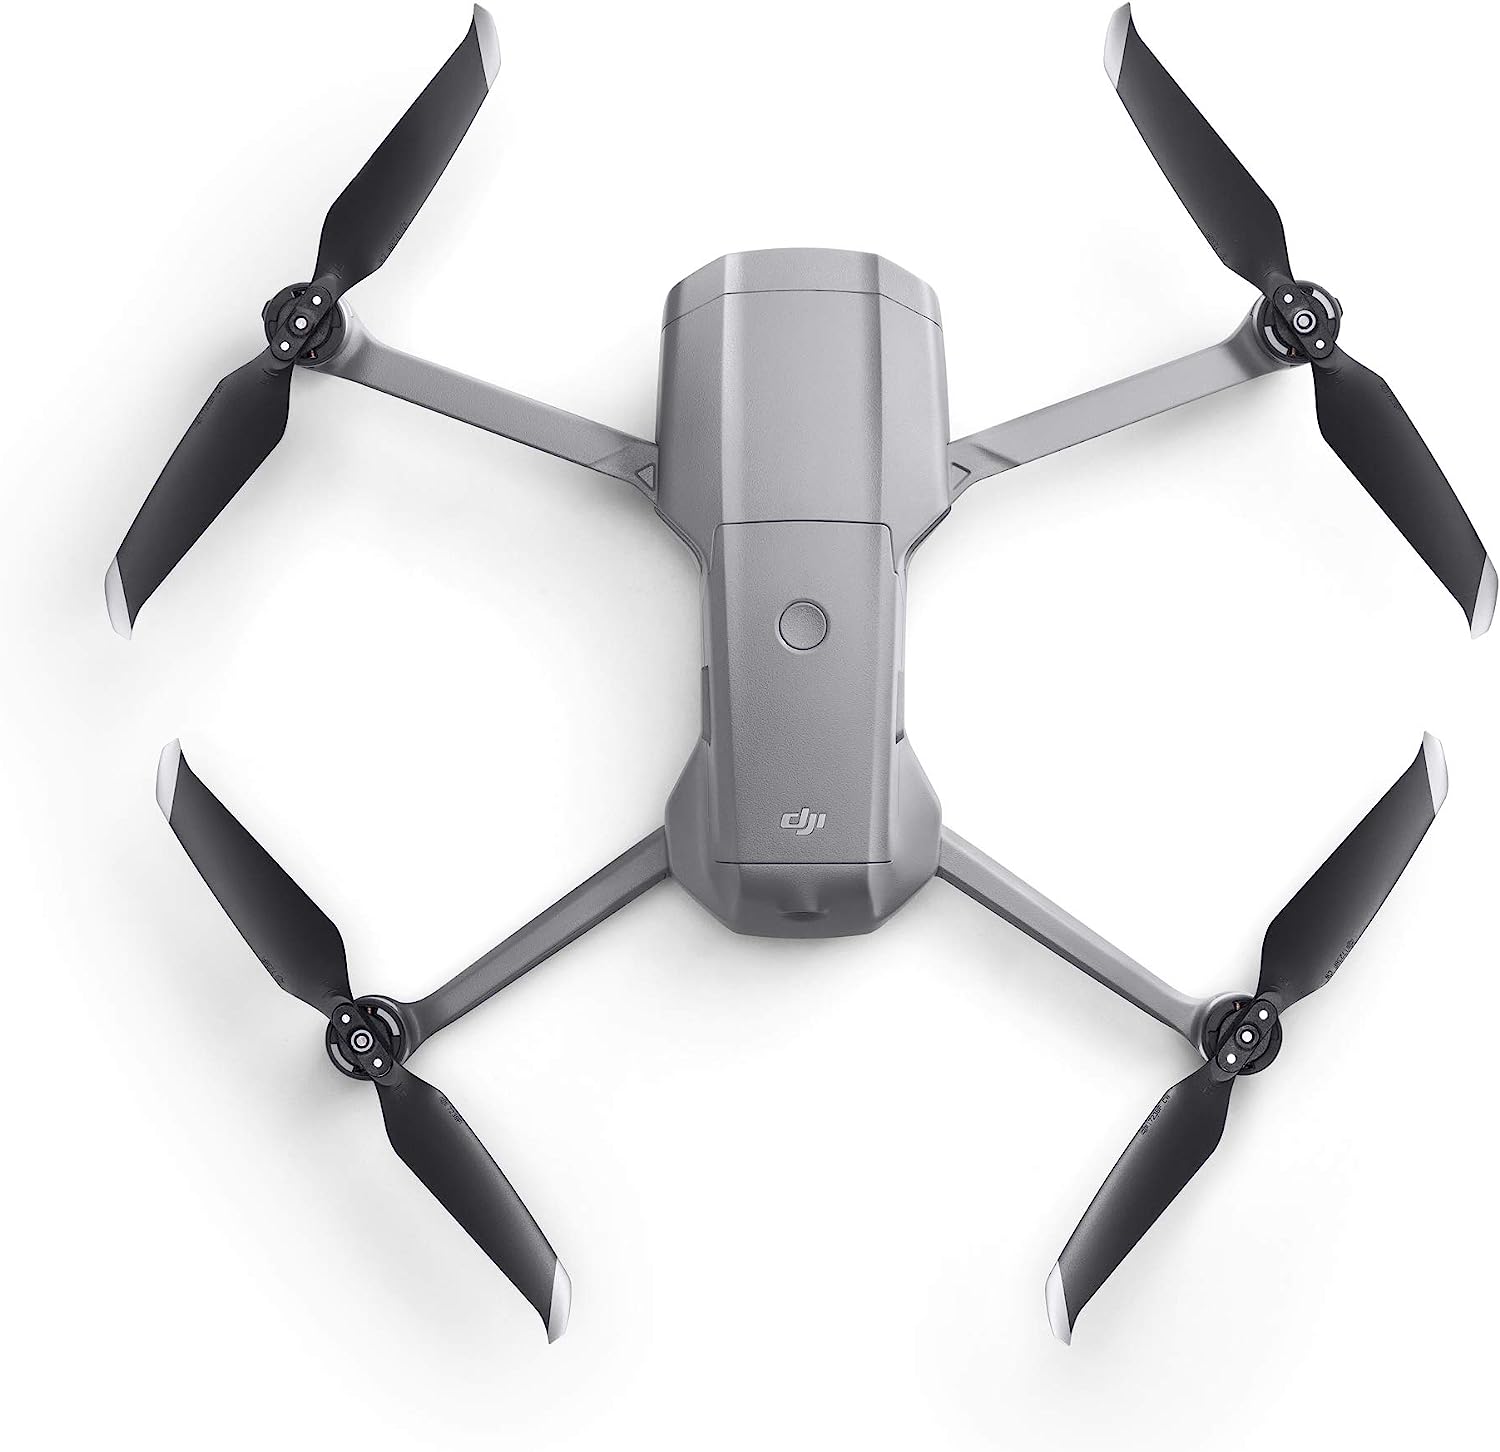 DJI Mavic Air 2 Fly More Combo with DJI Smart Controller - Drone Quadcopter UAV with 48MP Camera 4K Video 1/2